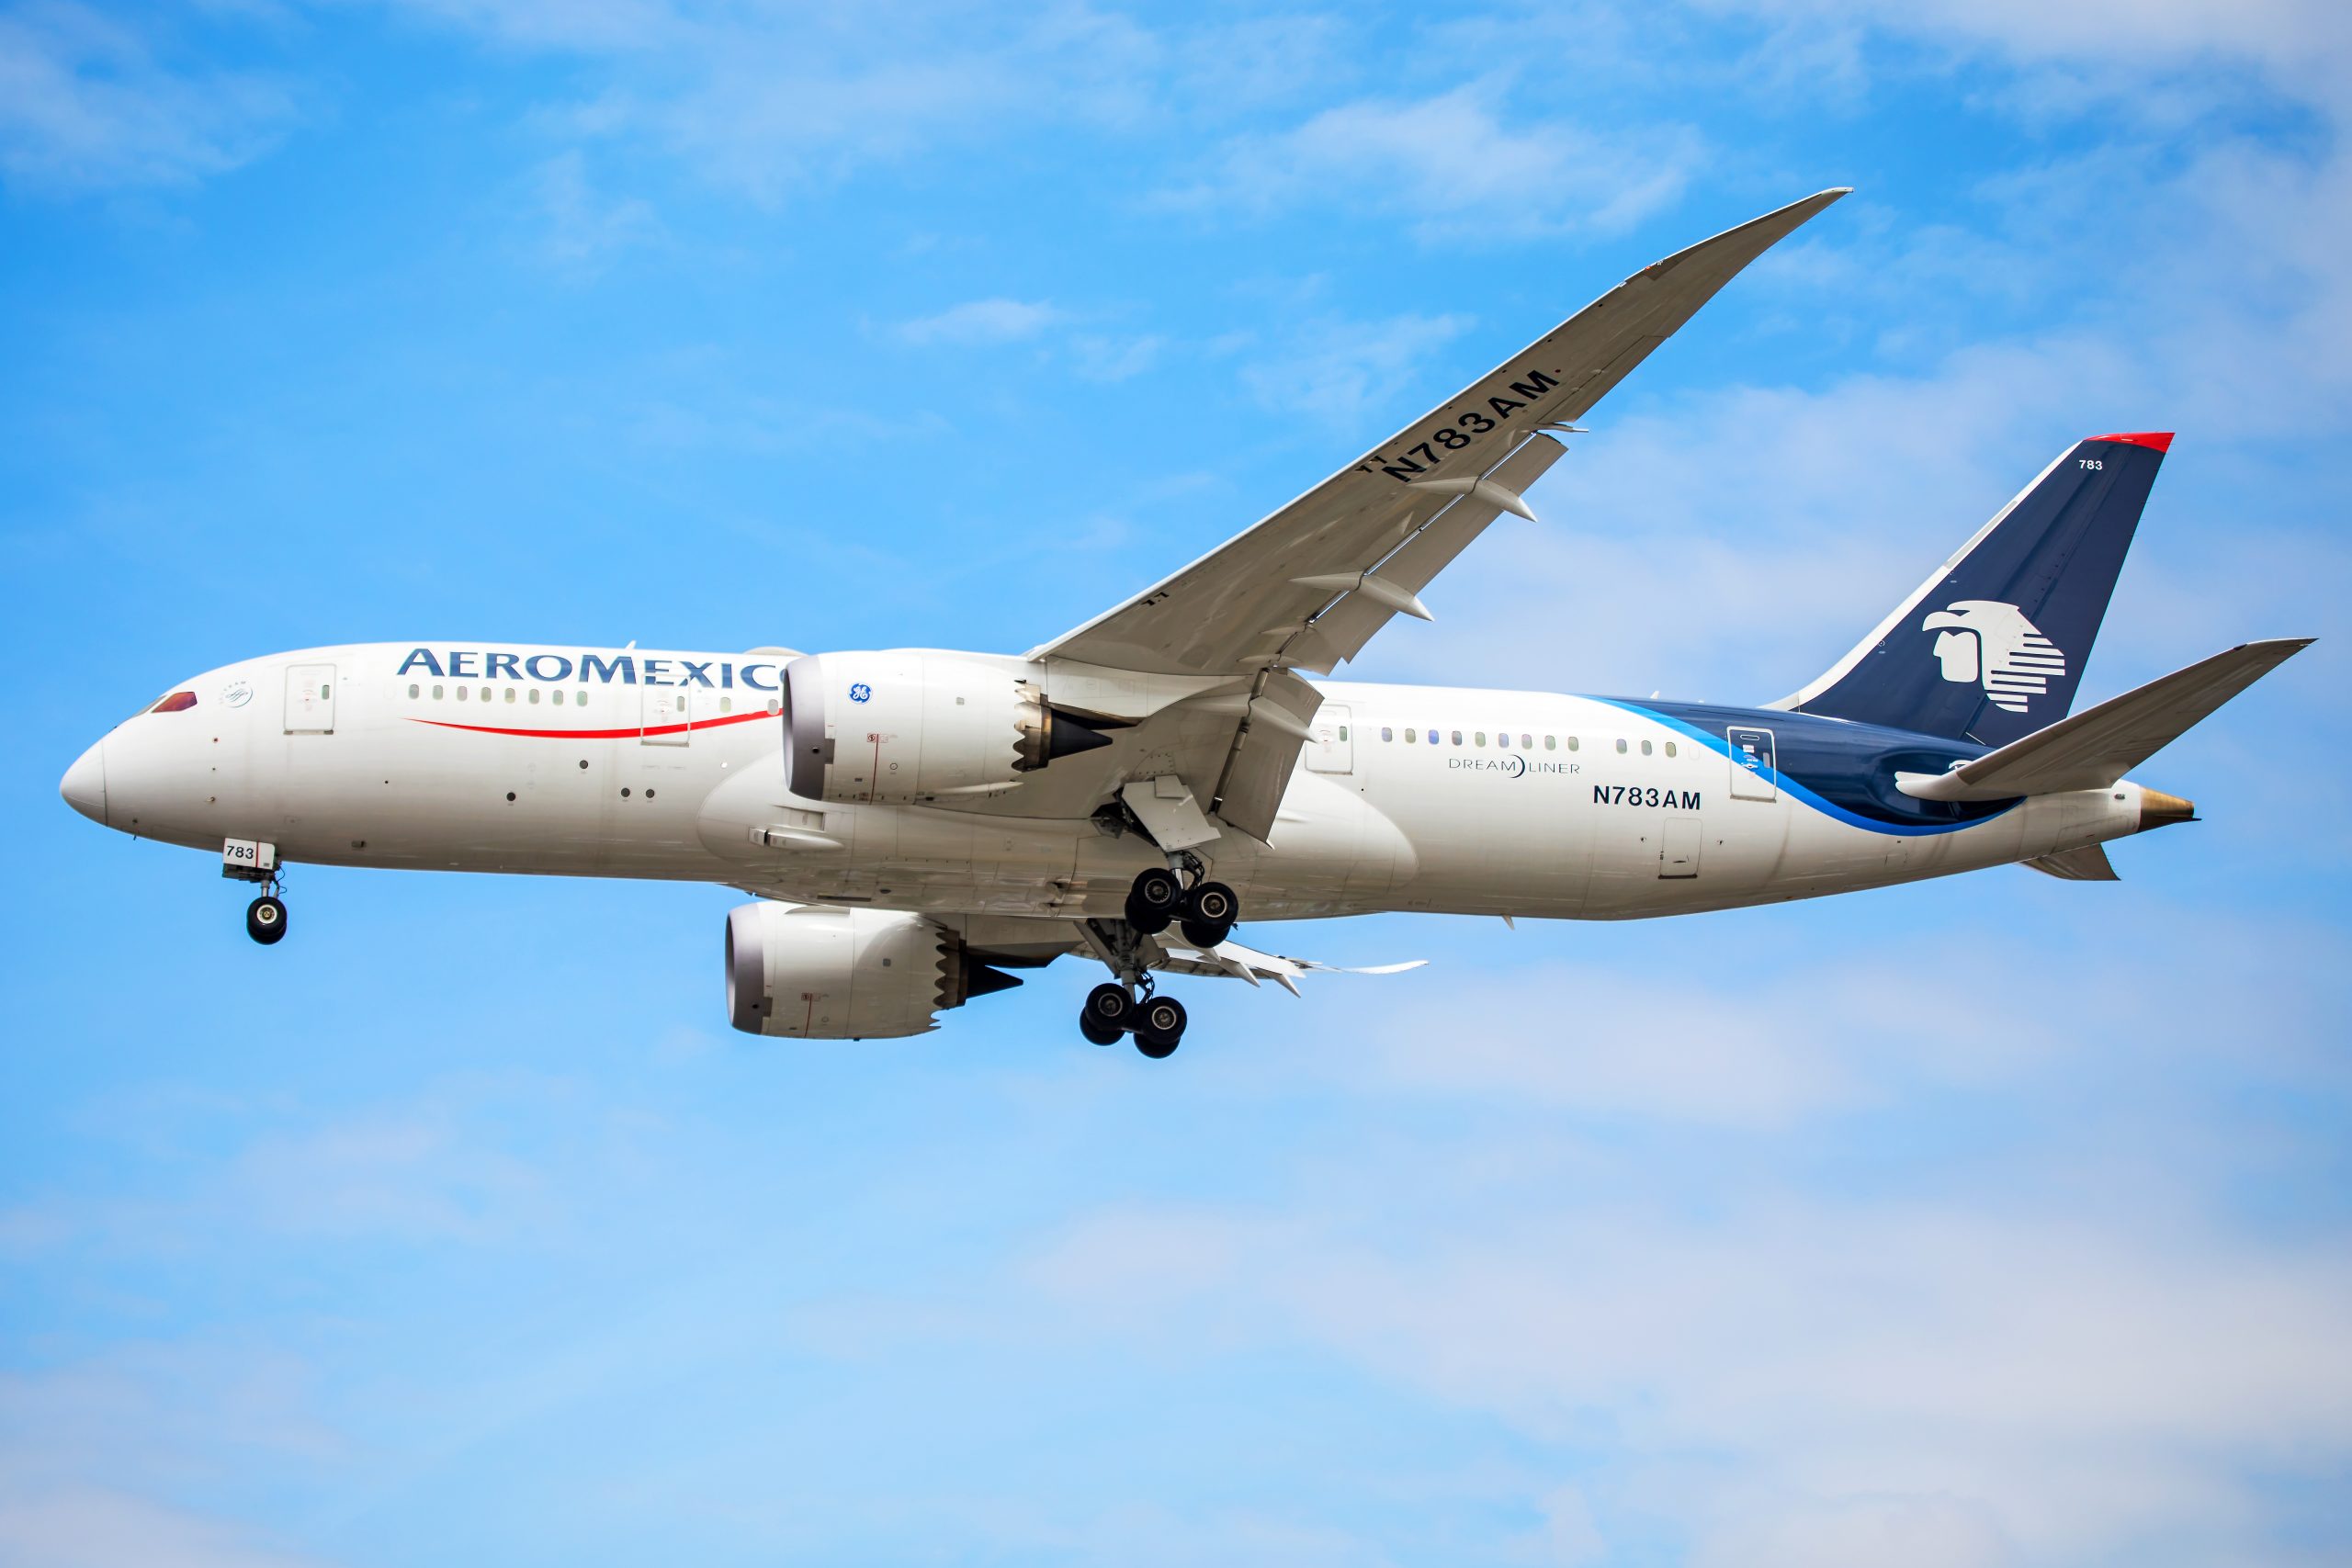 Aeromexico to lease 12 MAX aircraft